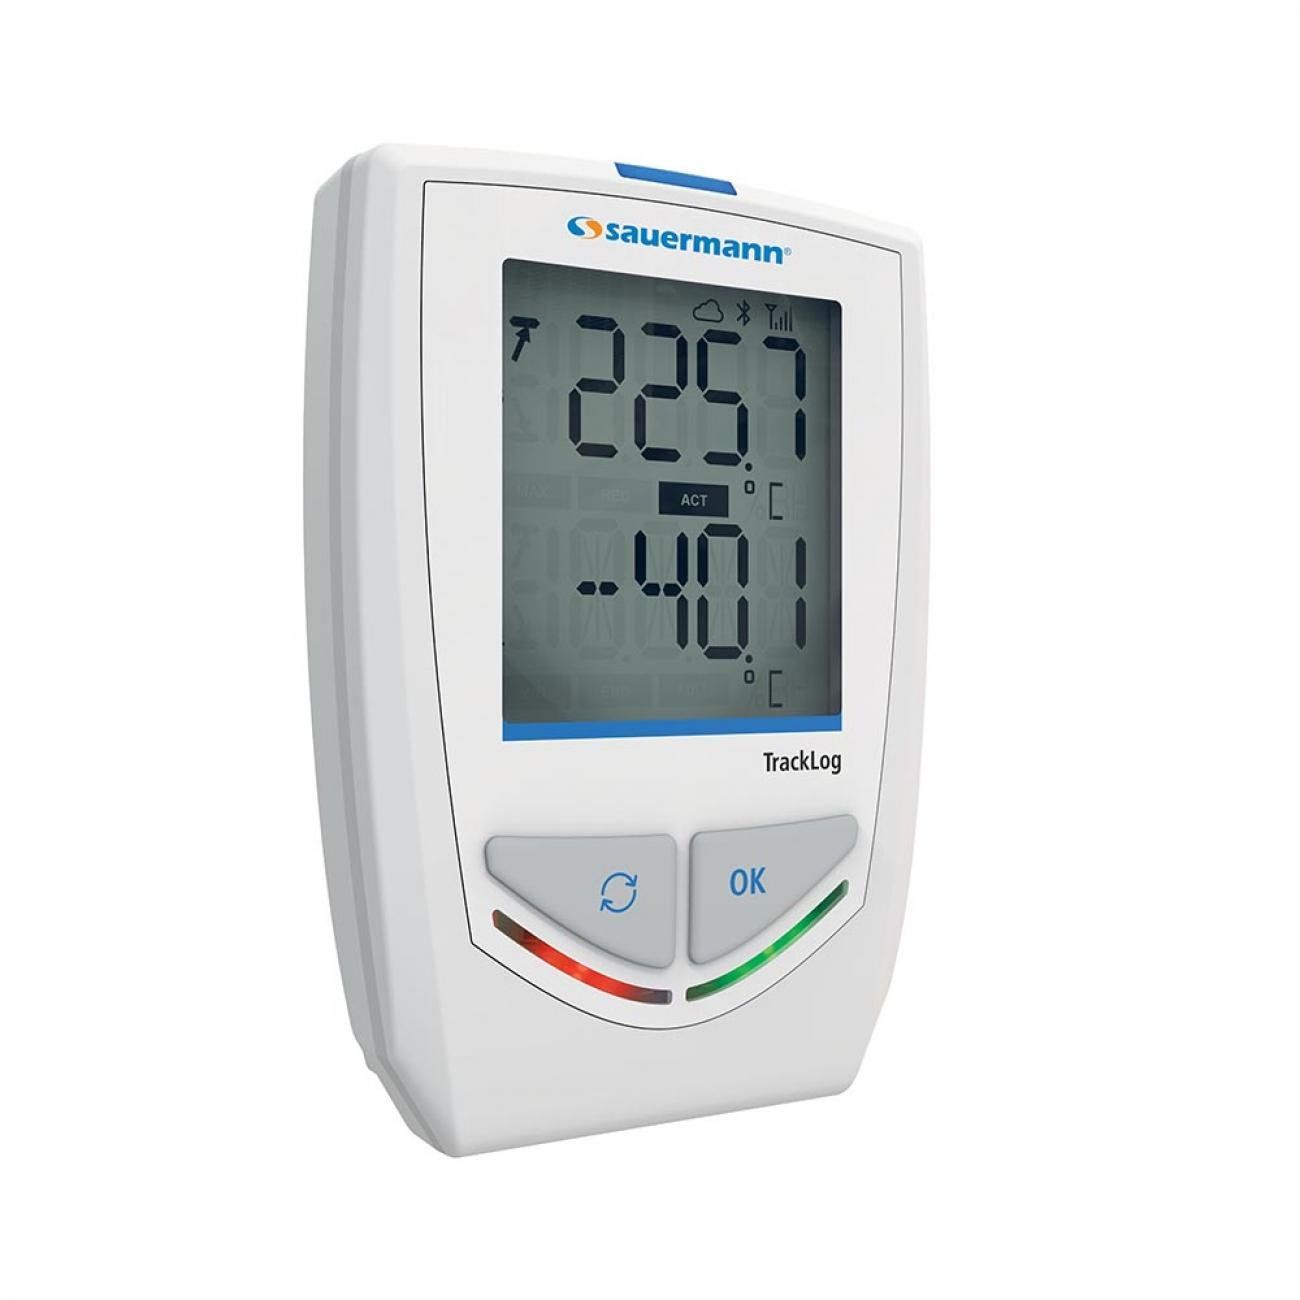 KCC Tracklog Data Logger can measure CO2 concentration, Humidity and temperature